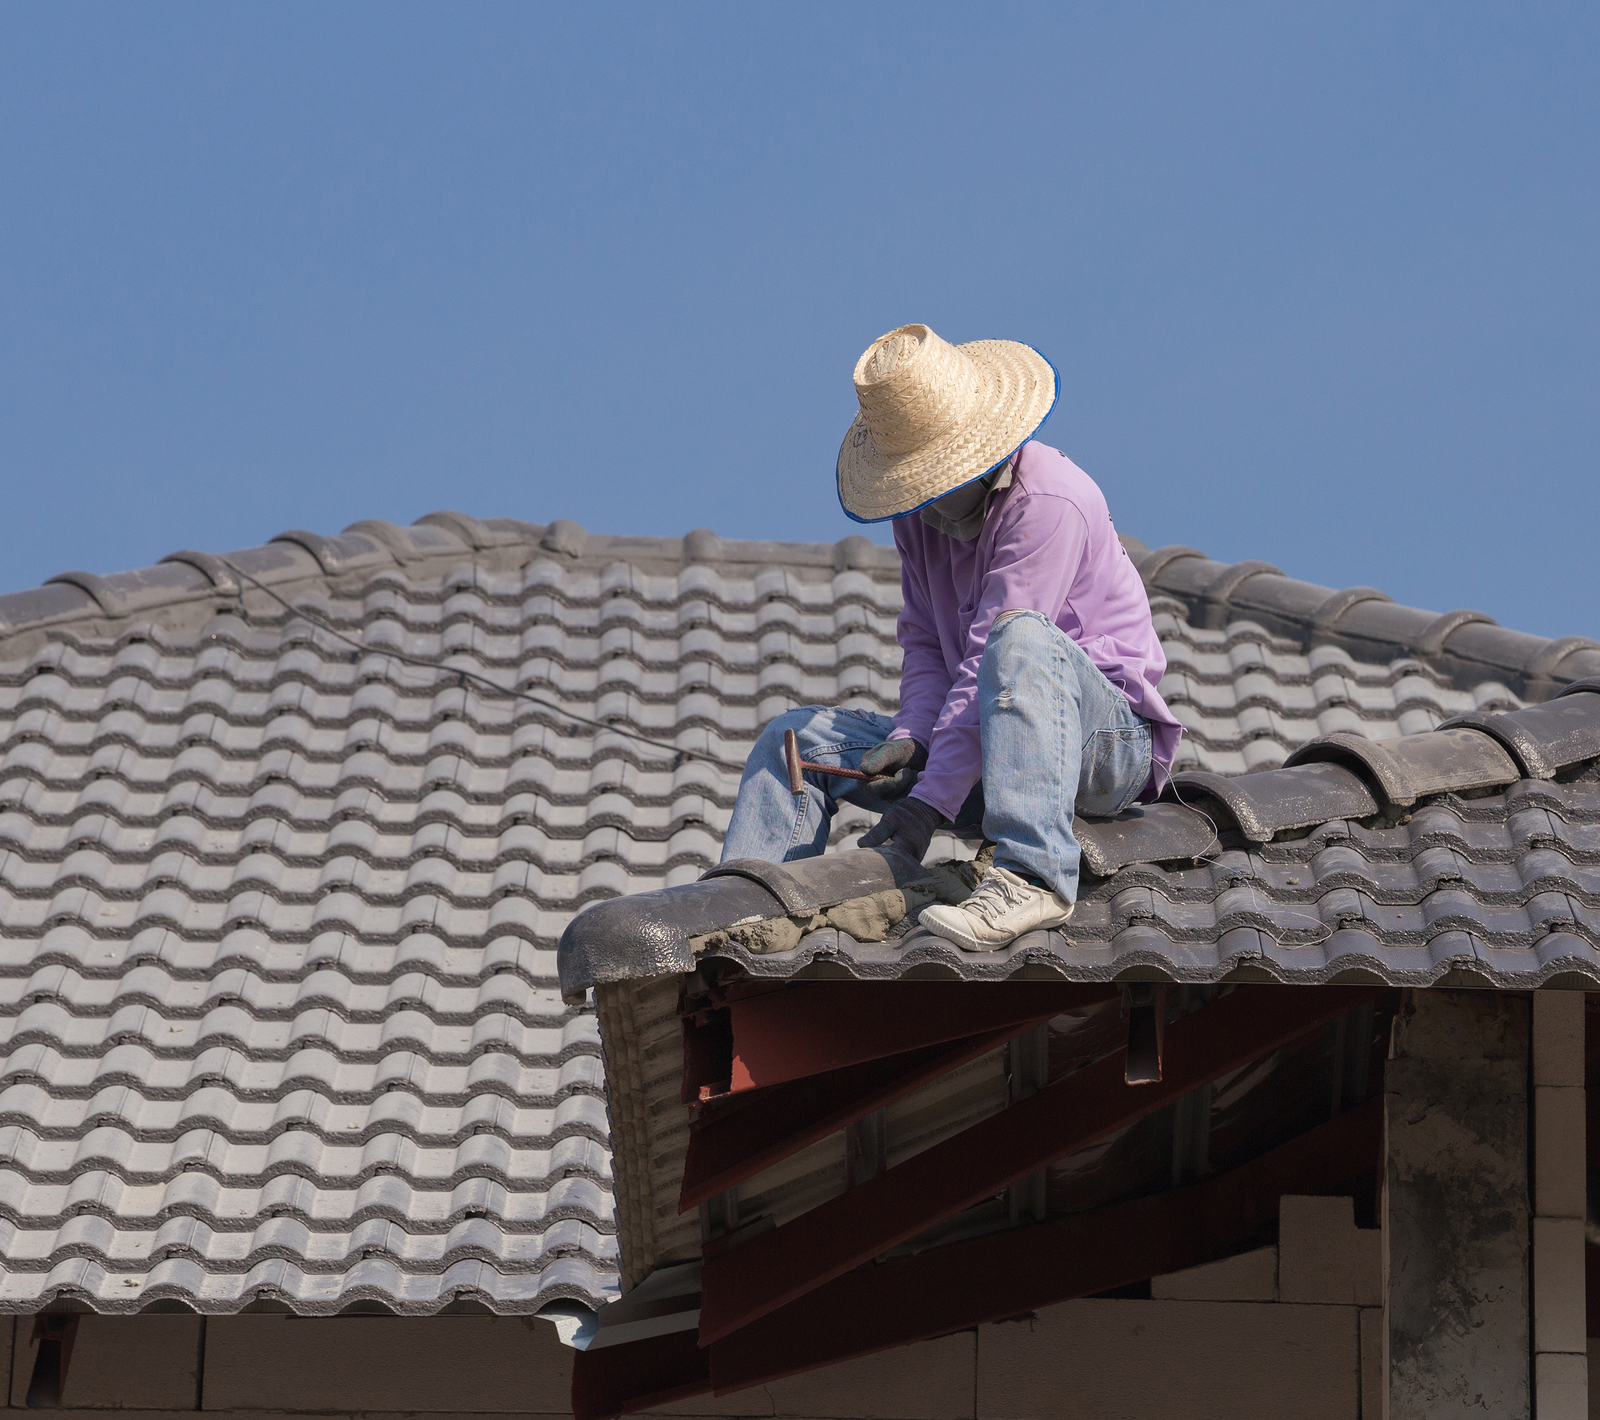 Workers Installing Roof Tiles For Home Building